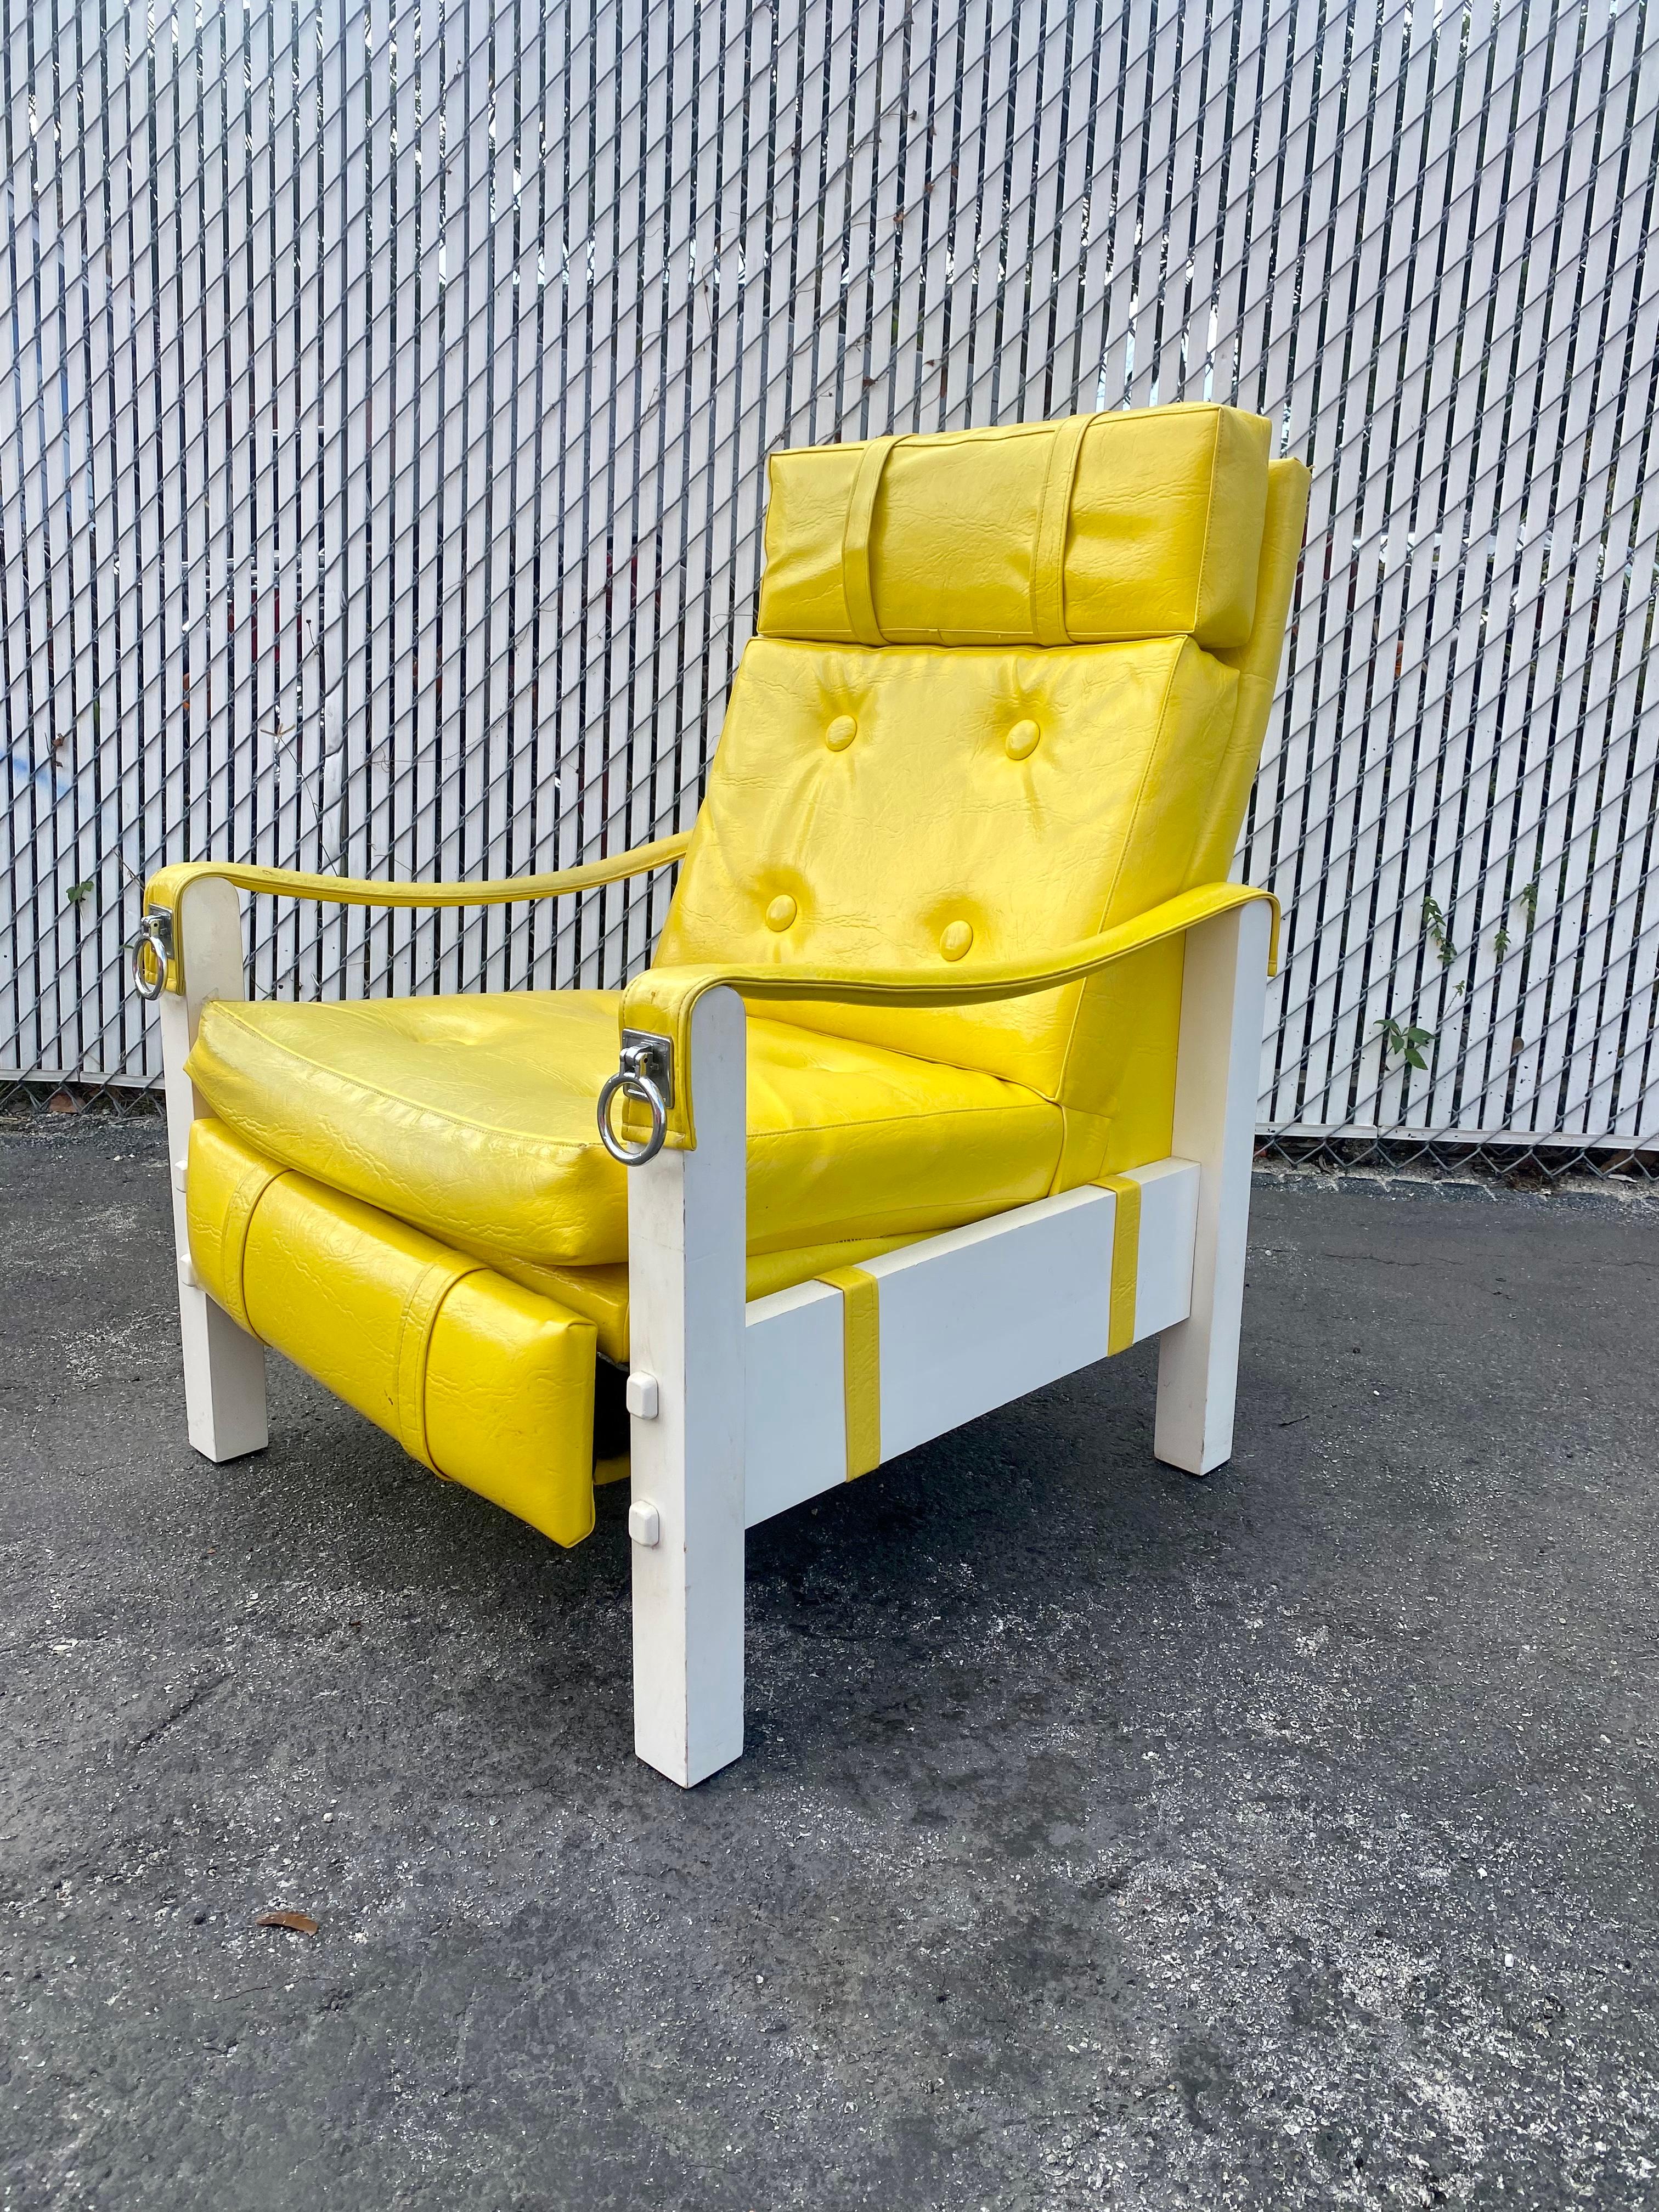 On offer on this occasion is one of the most stunning, reclining chair you could hope to find. Outstanding design is exhibited throughout. The beautiful chair is statement piece which is also extremely comfortable and packed with personality! Firm